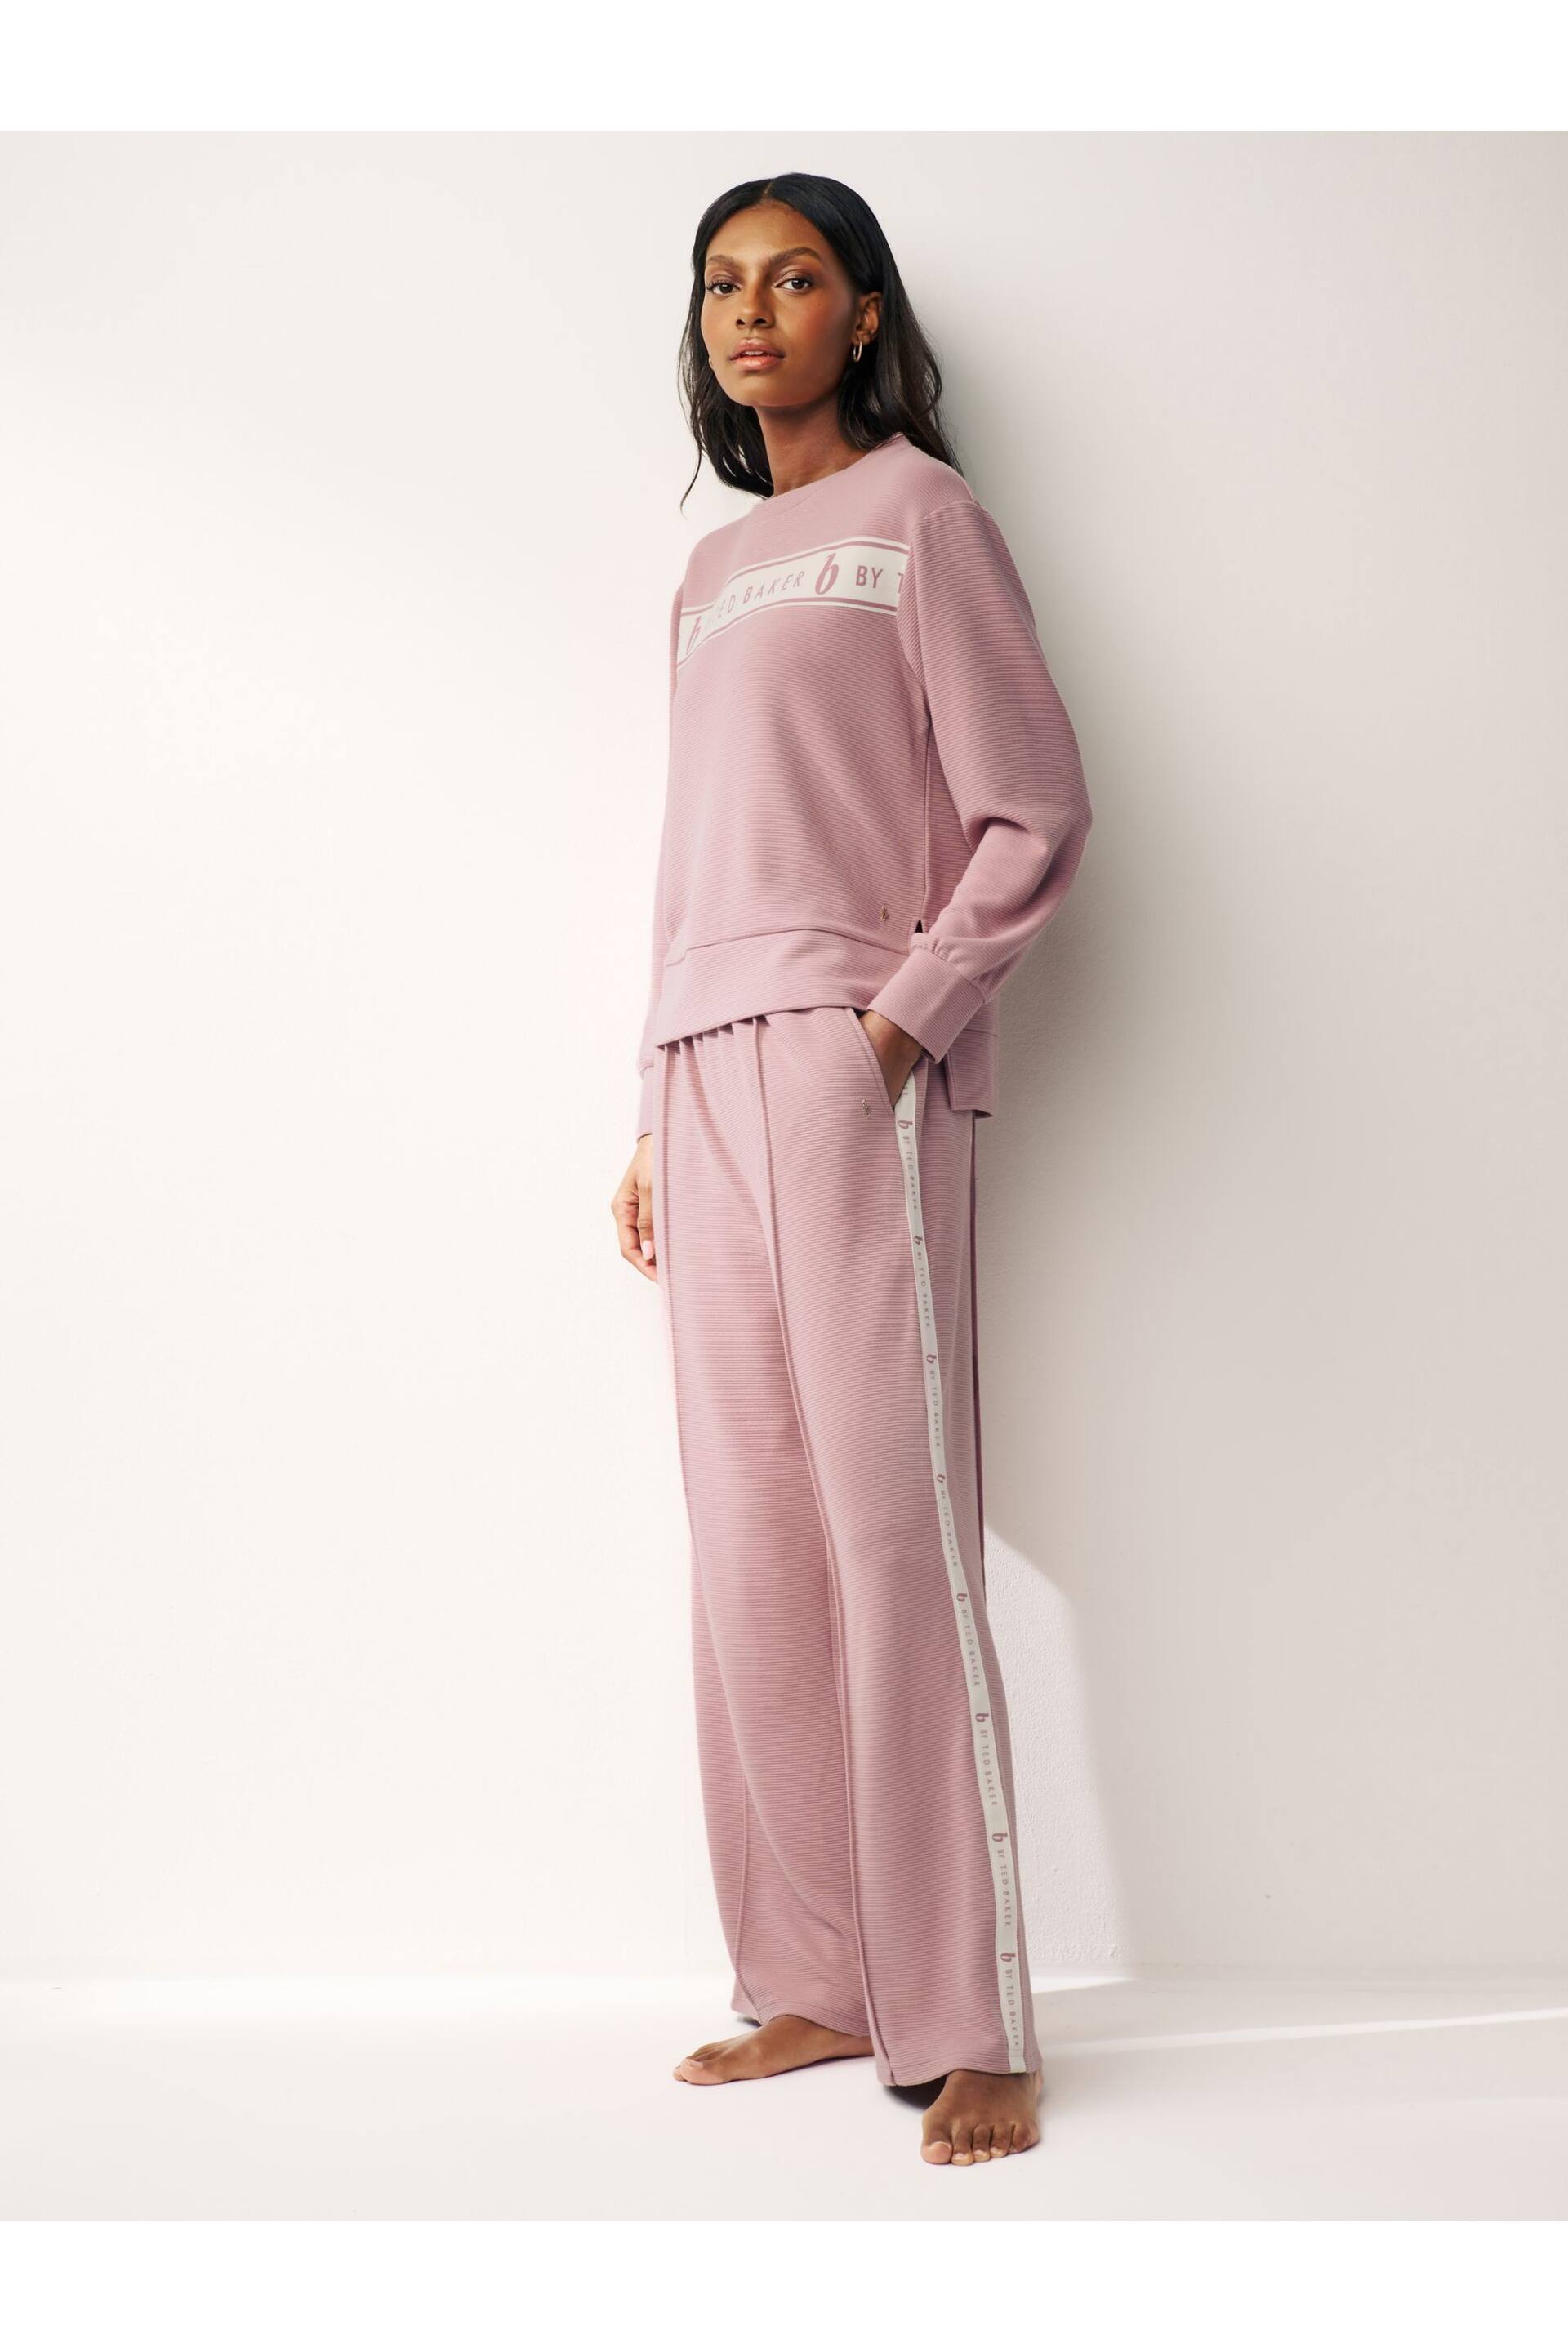 B by Ted Baker Ribbed Wide Leg Joggers - Image 2 of 5